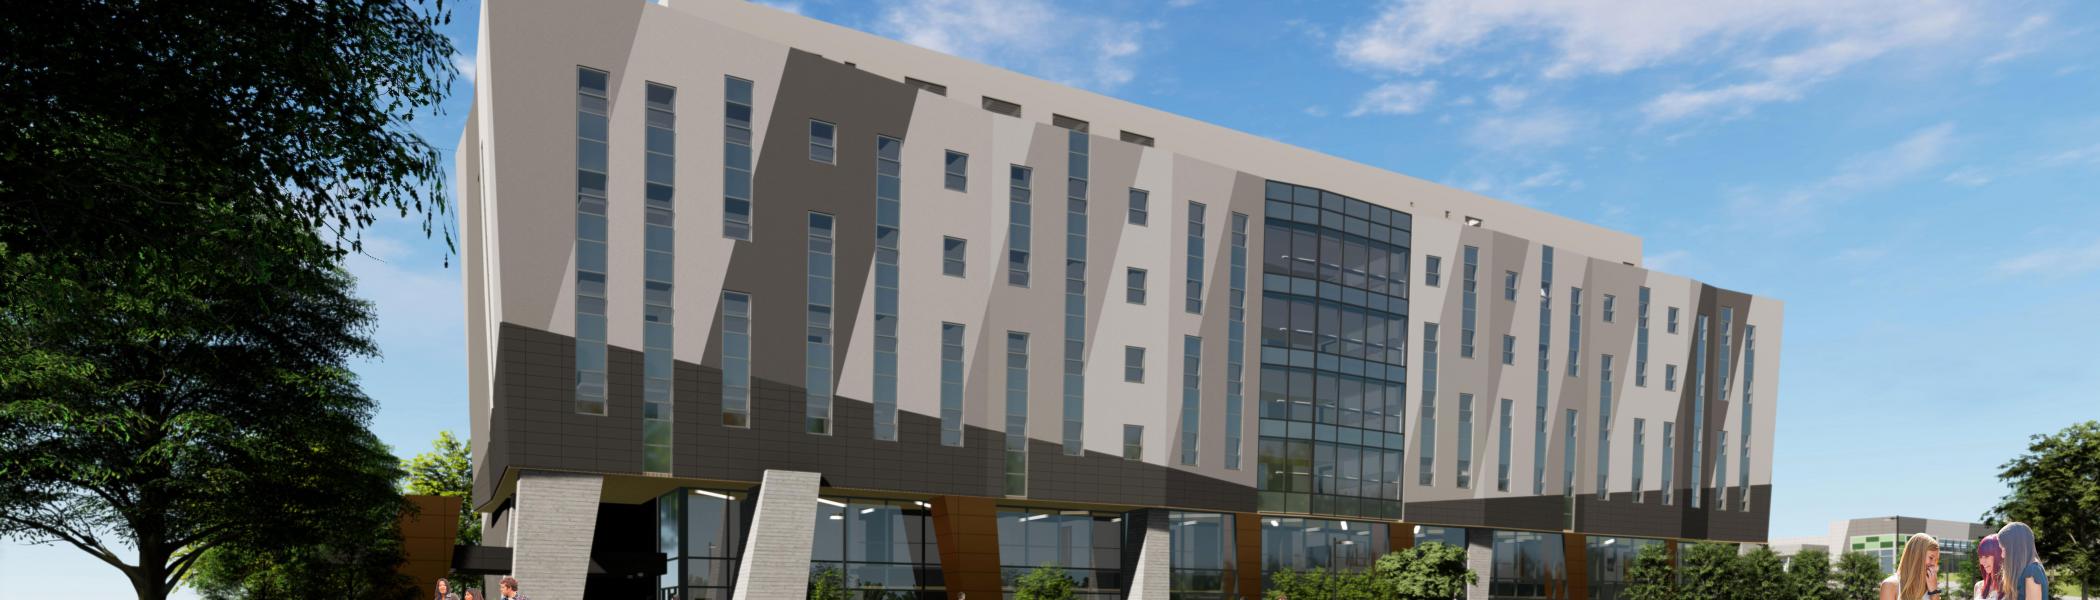 Architectural Rendition of the new building